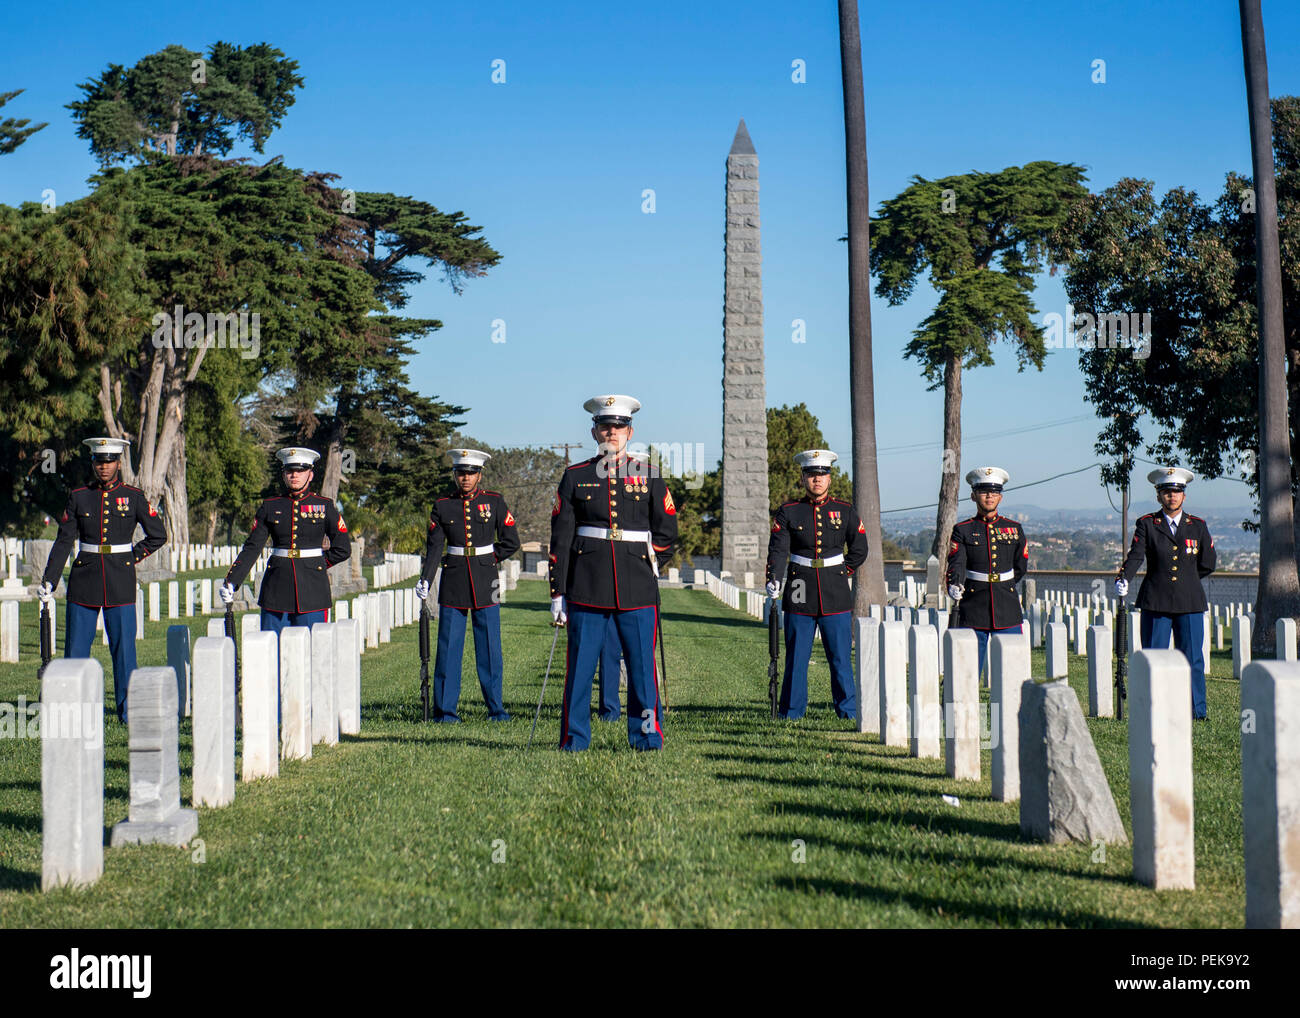 151212-N-QW941-005  SAN DIEGO (Dec. 12, 2015) Marines stand in formation during the Wreaths Across America ceremony at Fort Rosecran’s National Cemetery. Wreaths Across America is an annual event that takes place in multiple locations where volunteers lay wreaths on tombstones of fallen military members. (U.S. Navy photo by Mass Communication Specialist 3rd Class Trevor Kohlrus/Released) Stock Photo